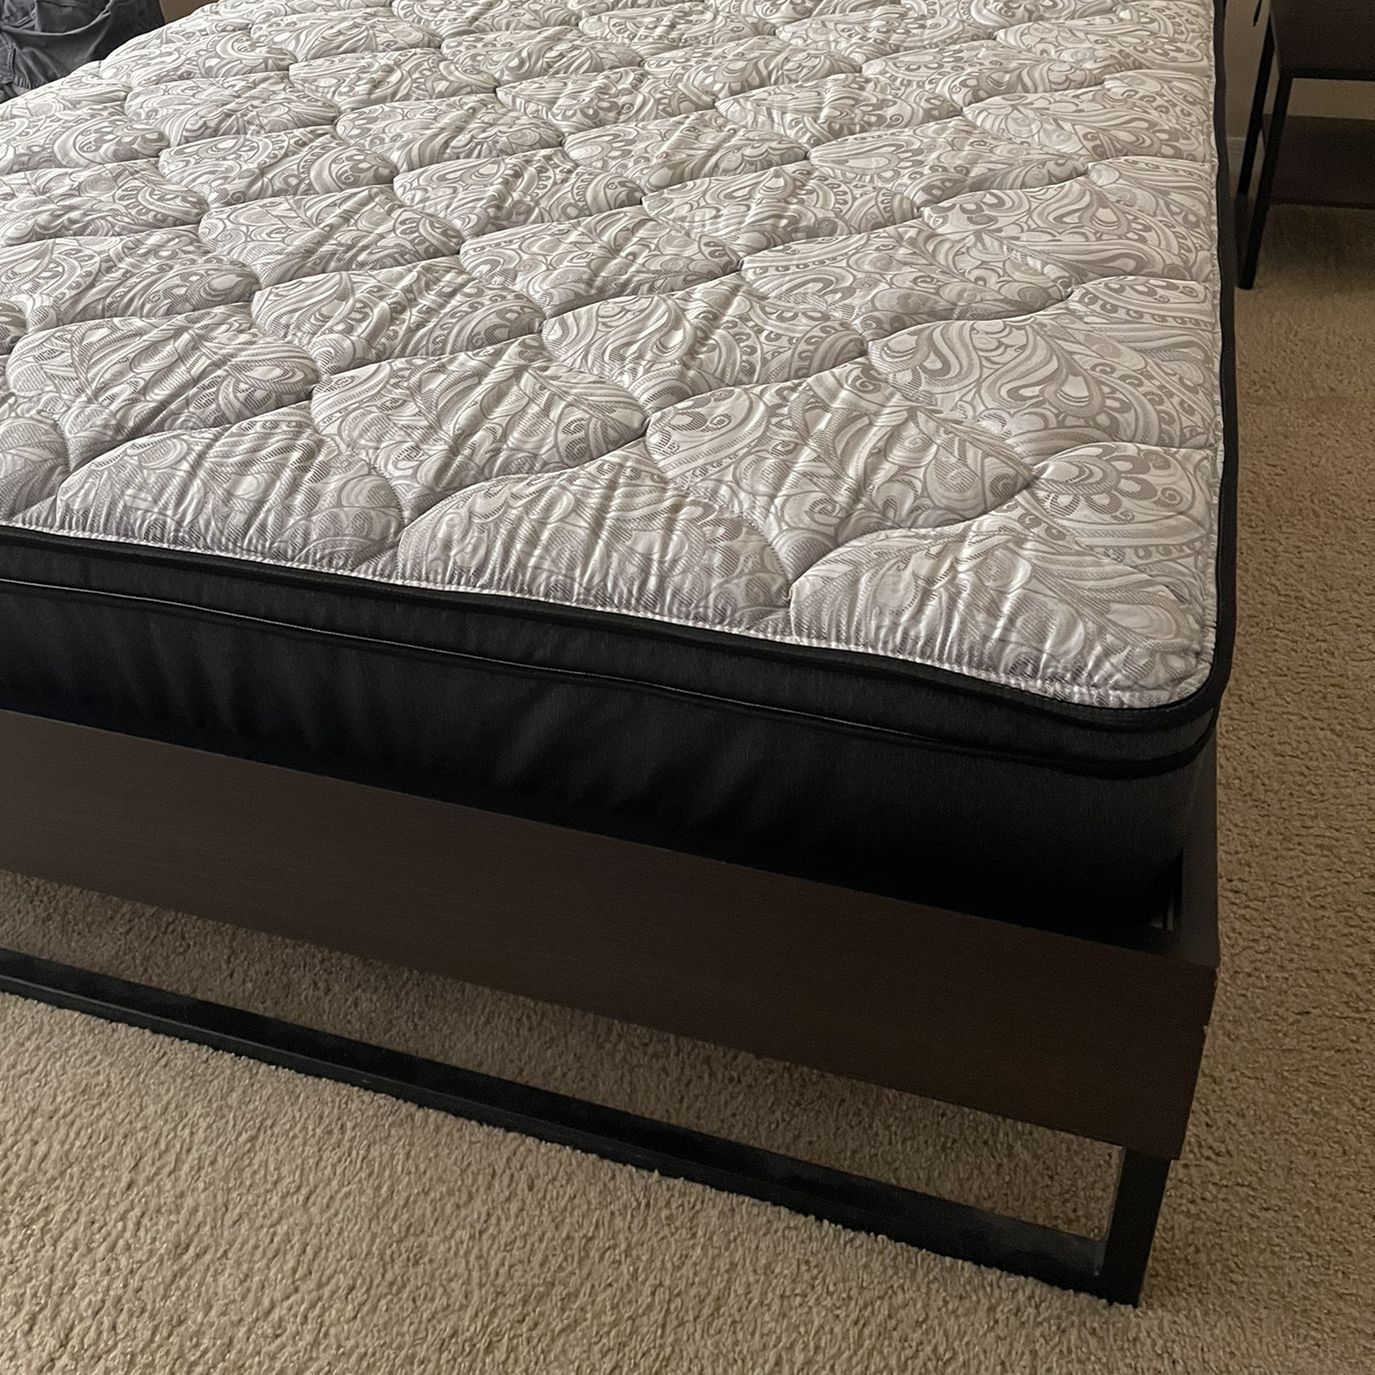 King Queen Full Twin Sizes Mattresses Available Brand New From Factory $40 Down 